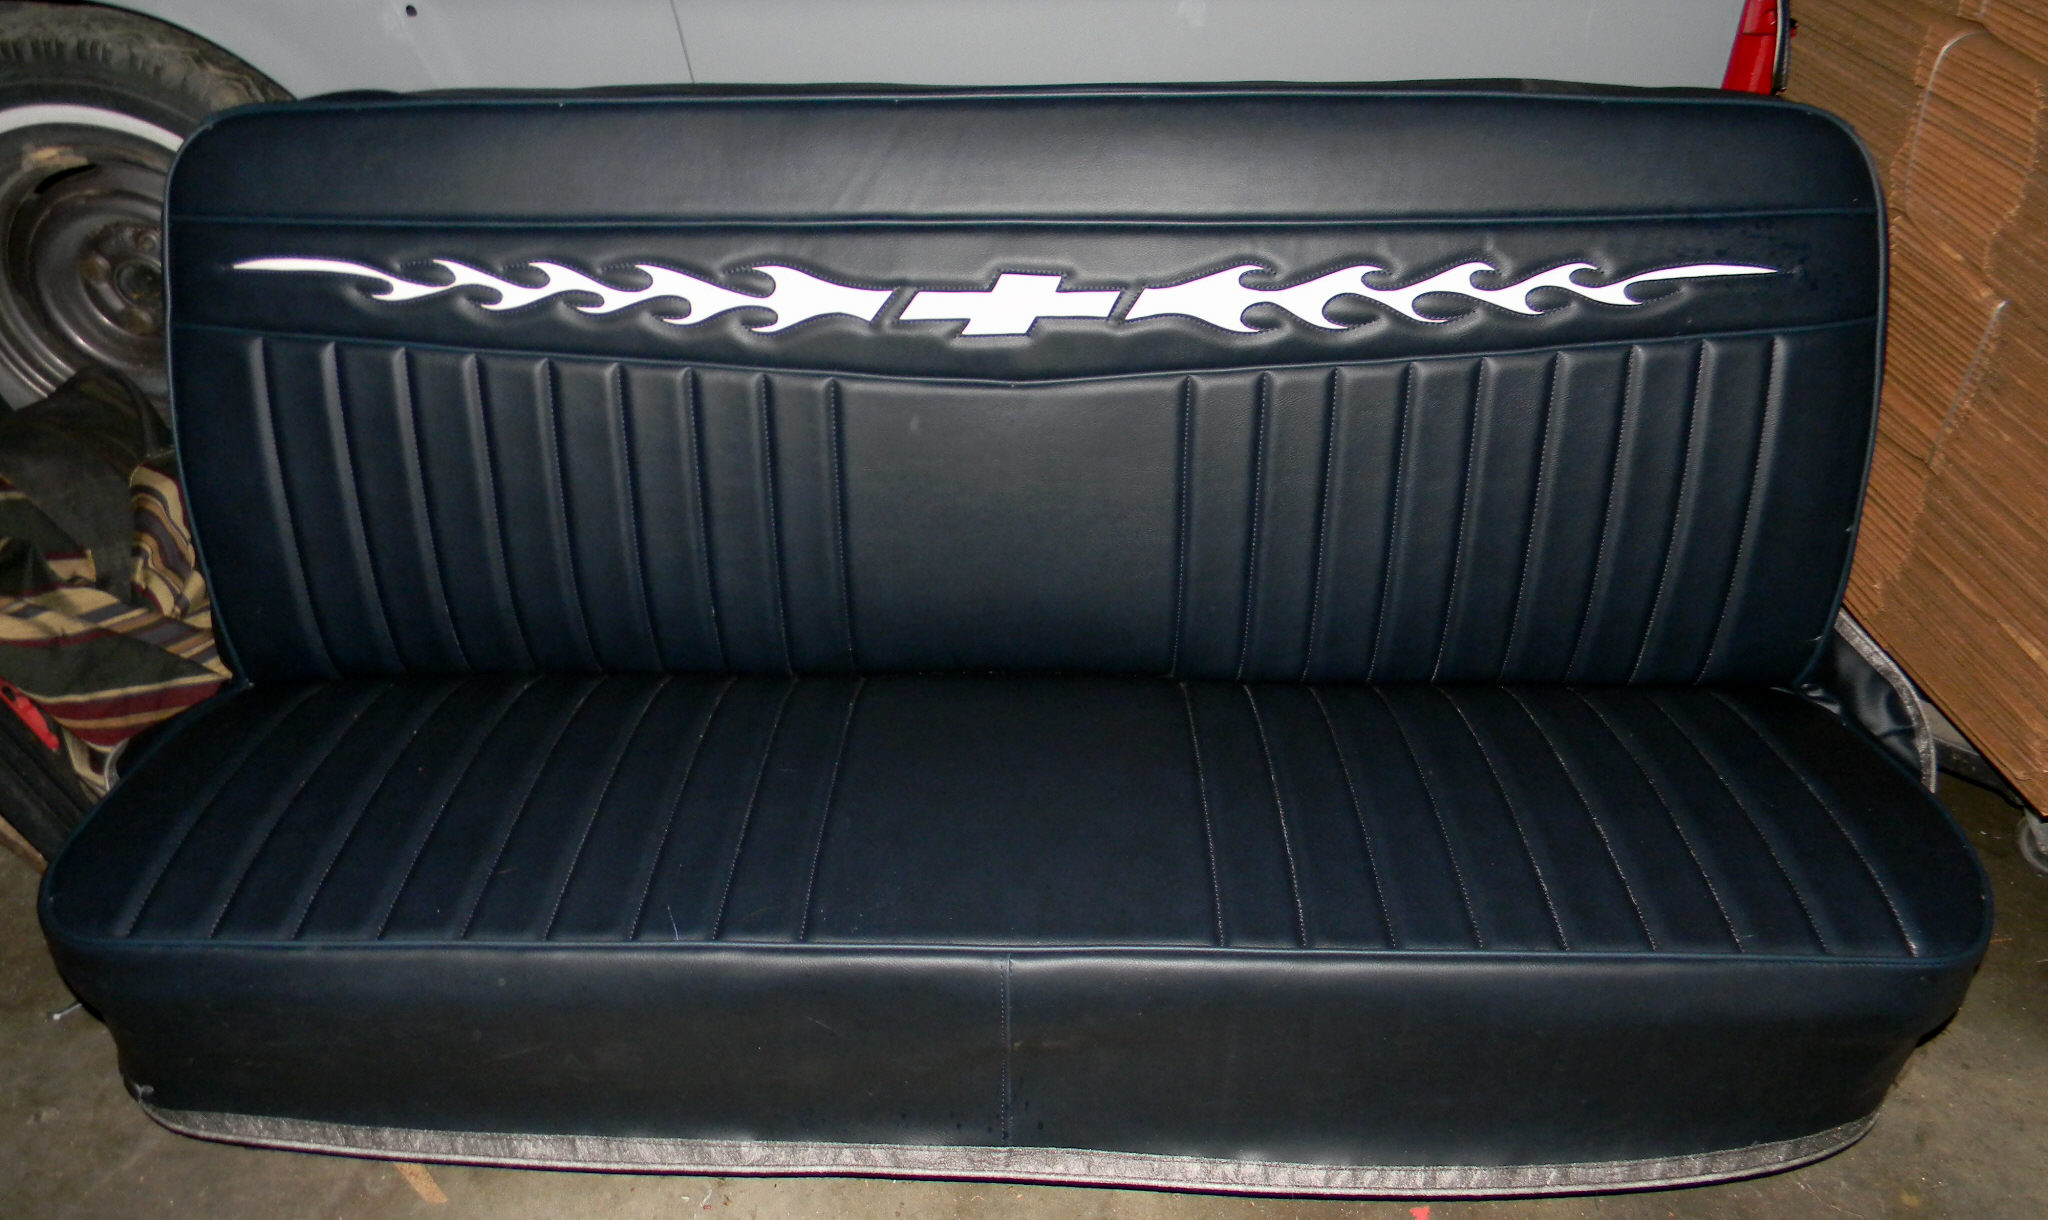 47-72 C10 Truck seat cover